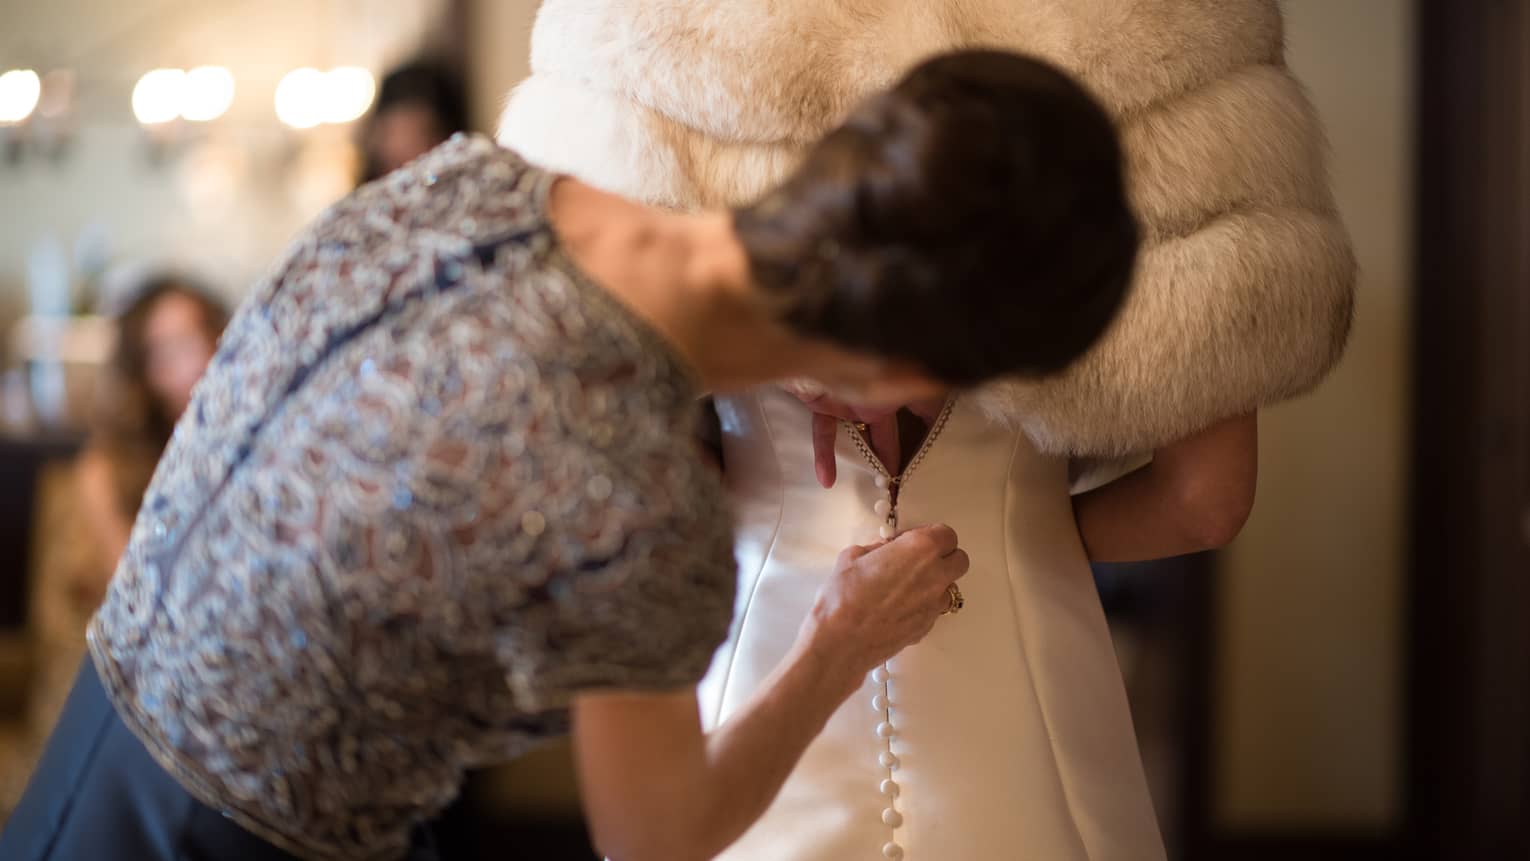 Woman helps button back of bride's wedding gown under fur coat